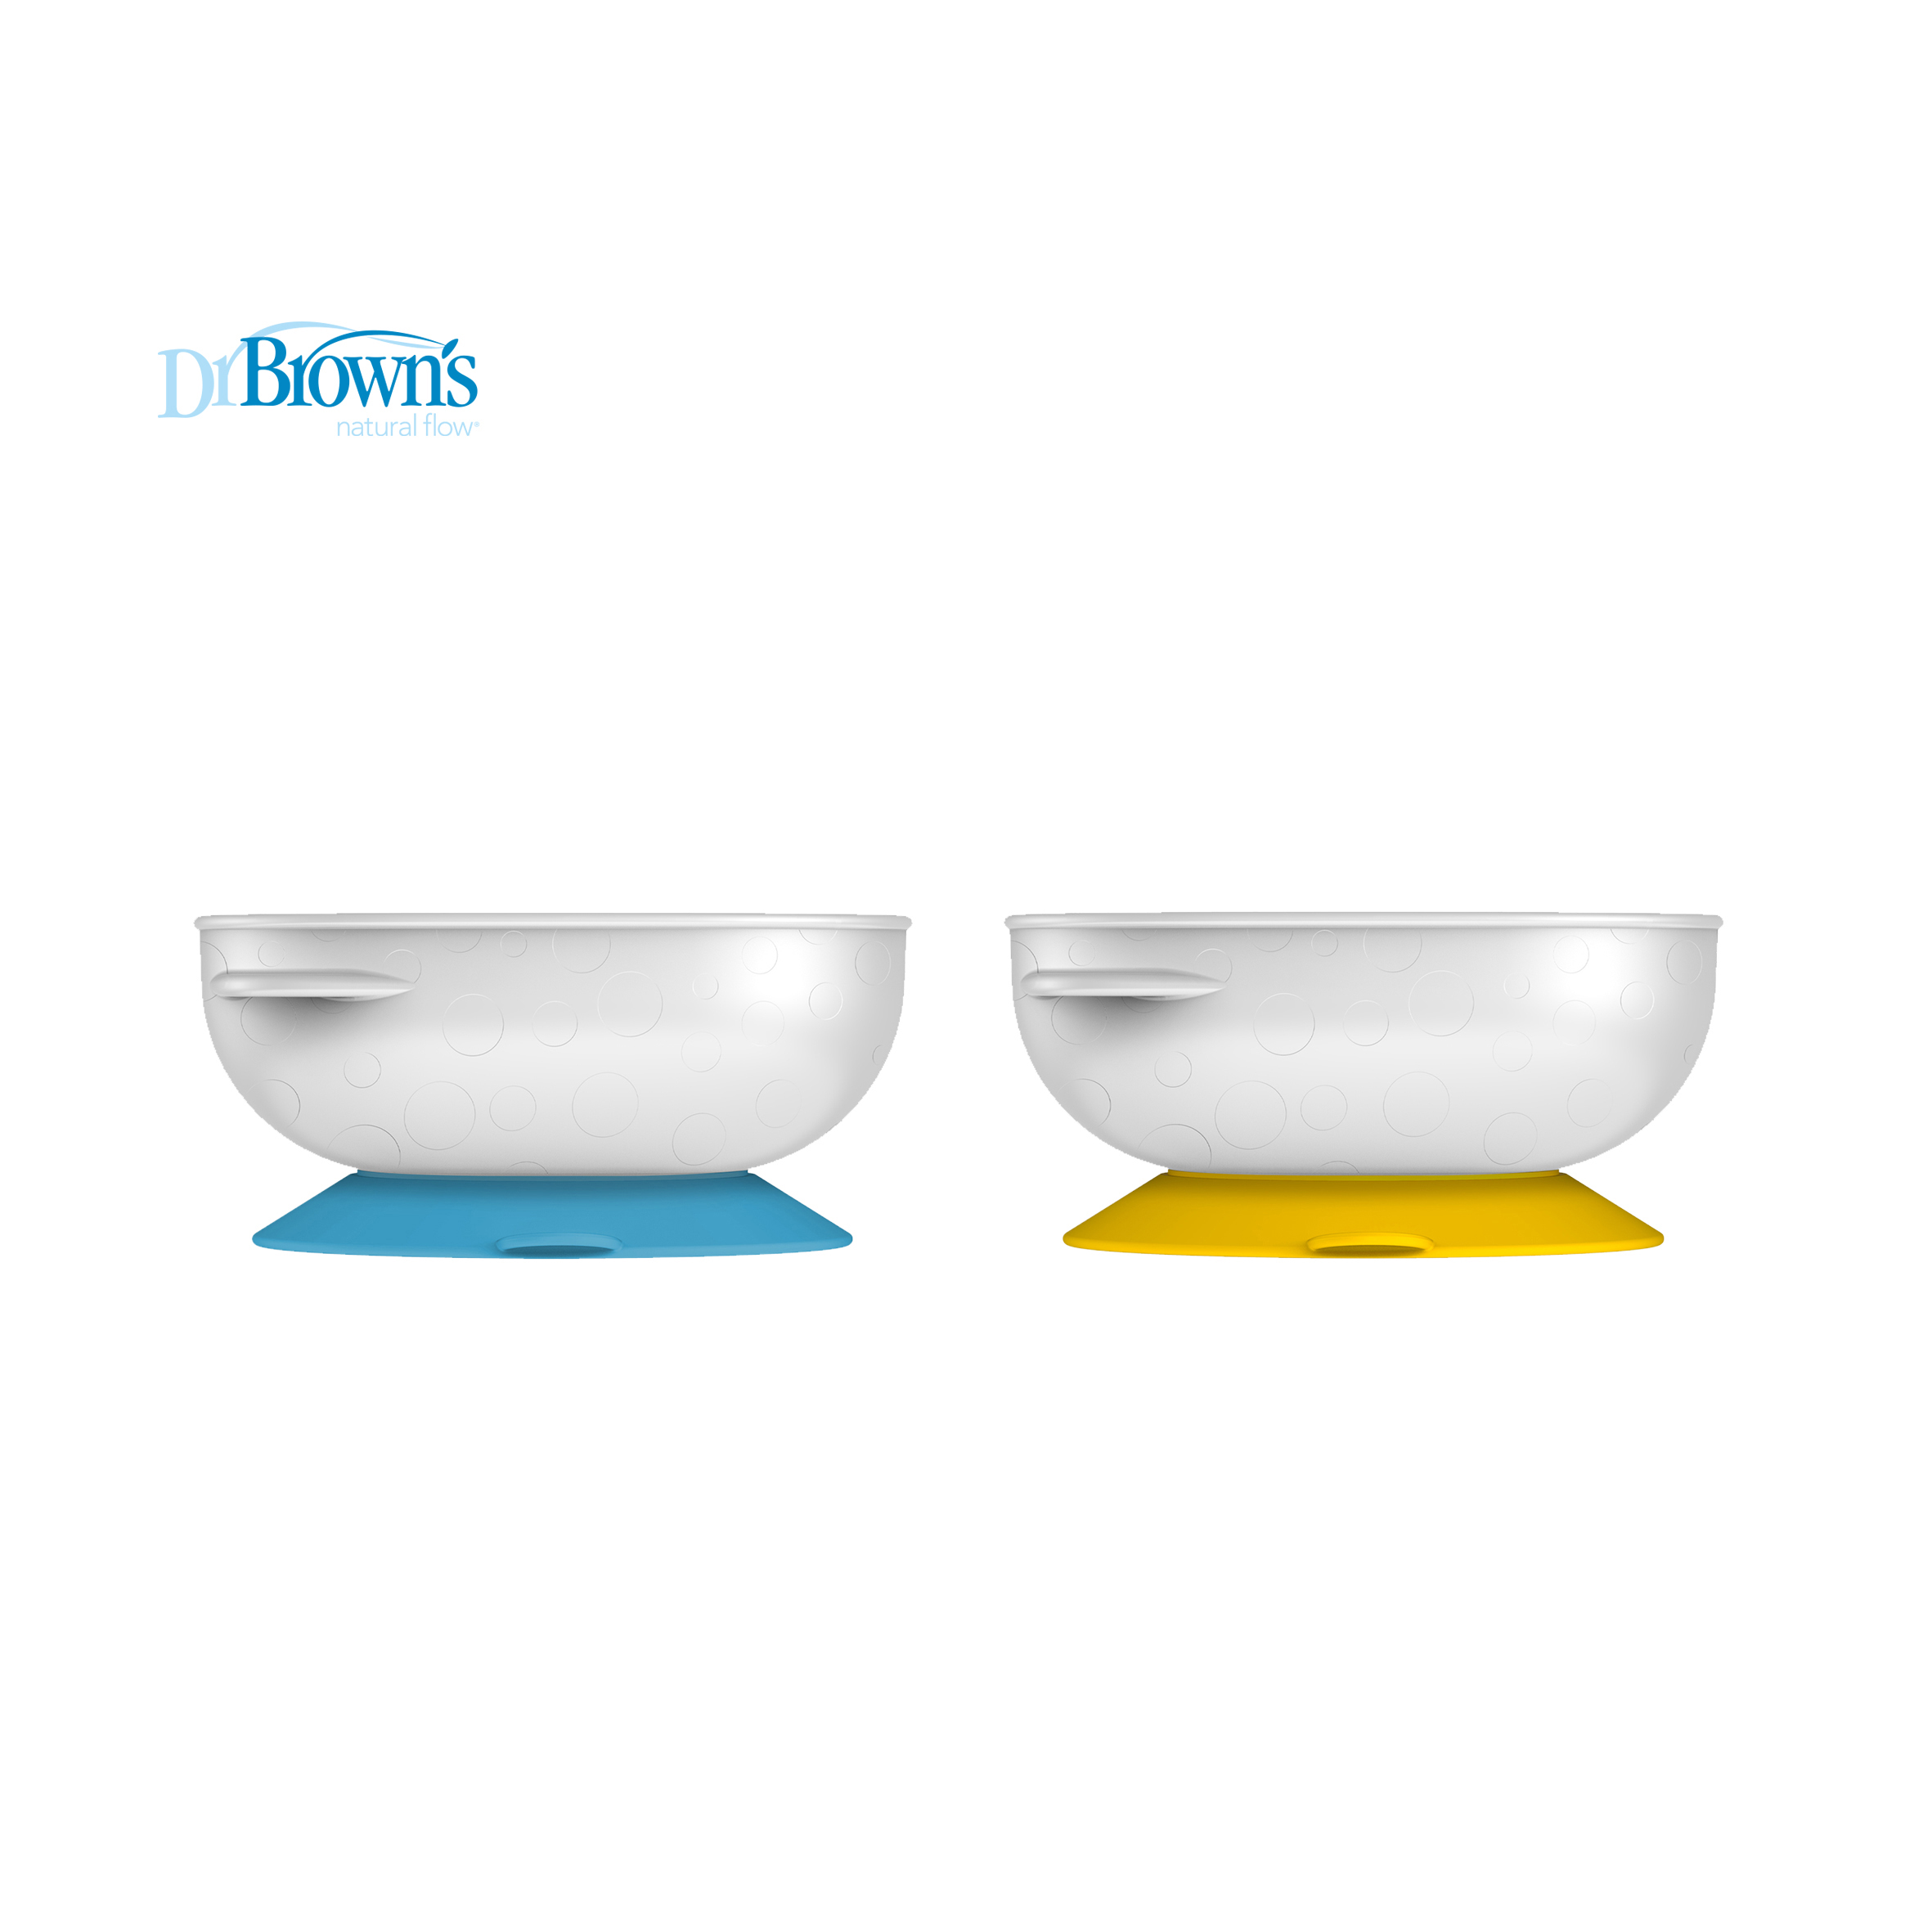 Dr Browns No Slip Suction Bowl, 2-Pack